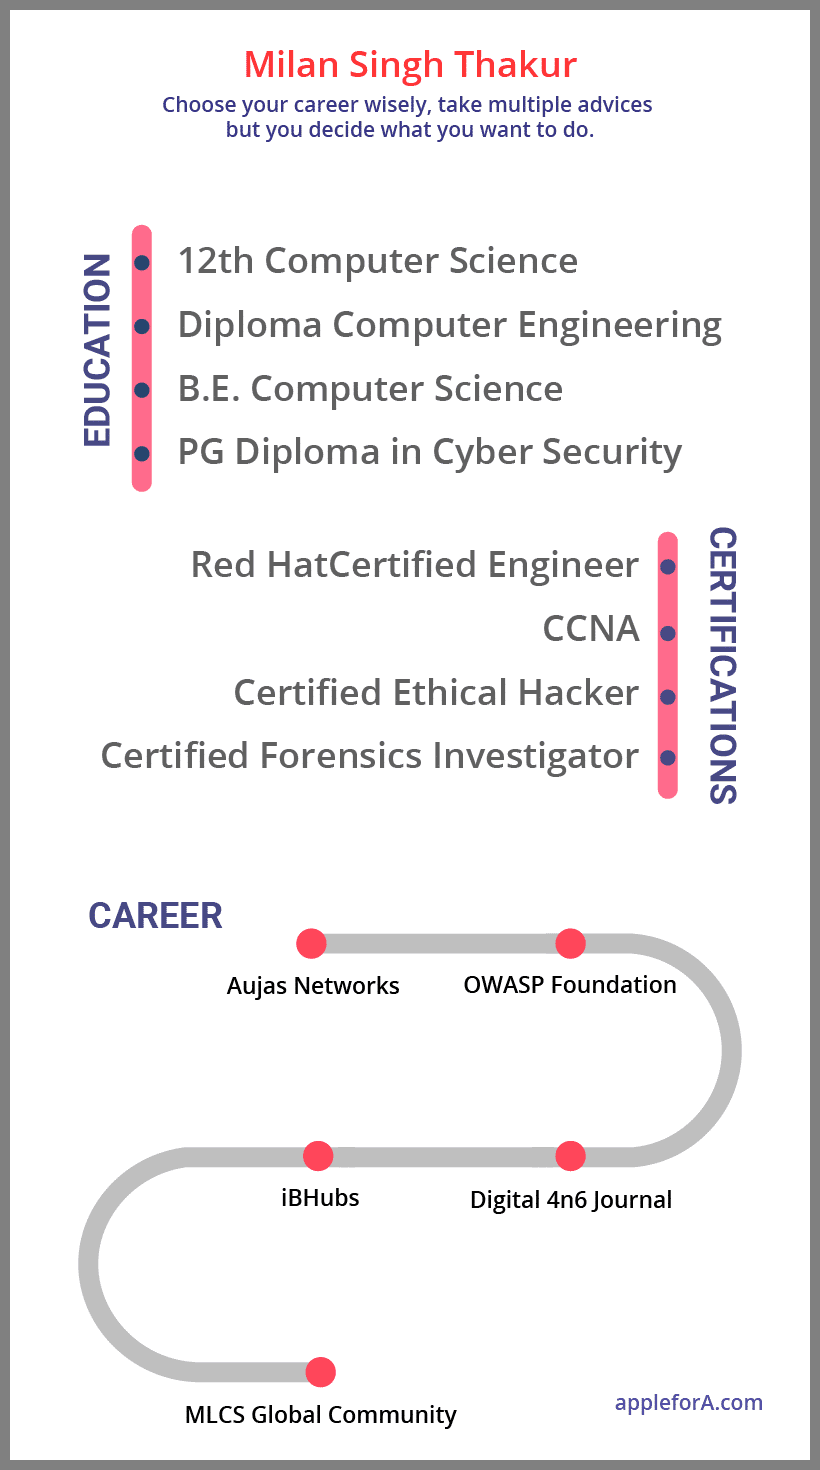 education certifications career path cyber security analyst milan singh thakur